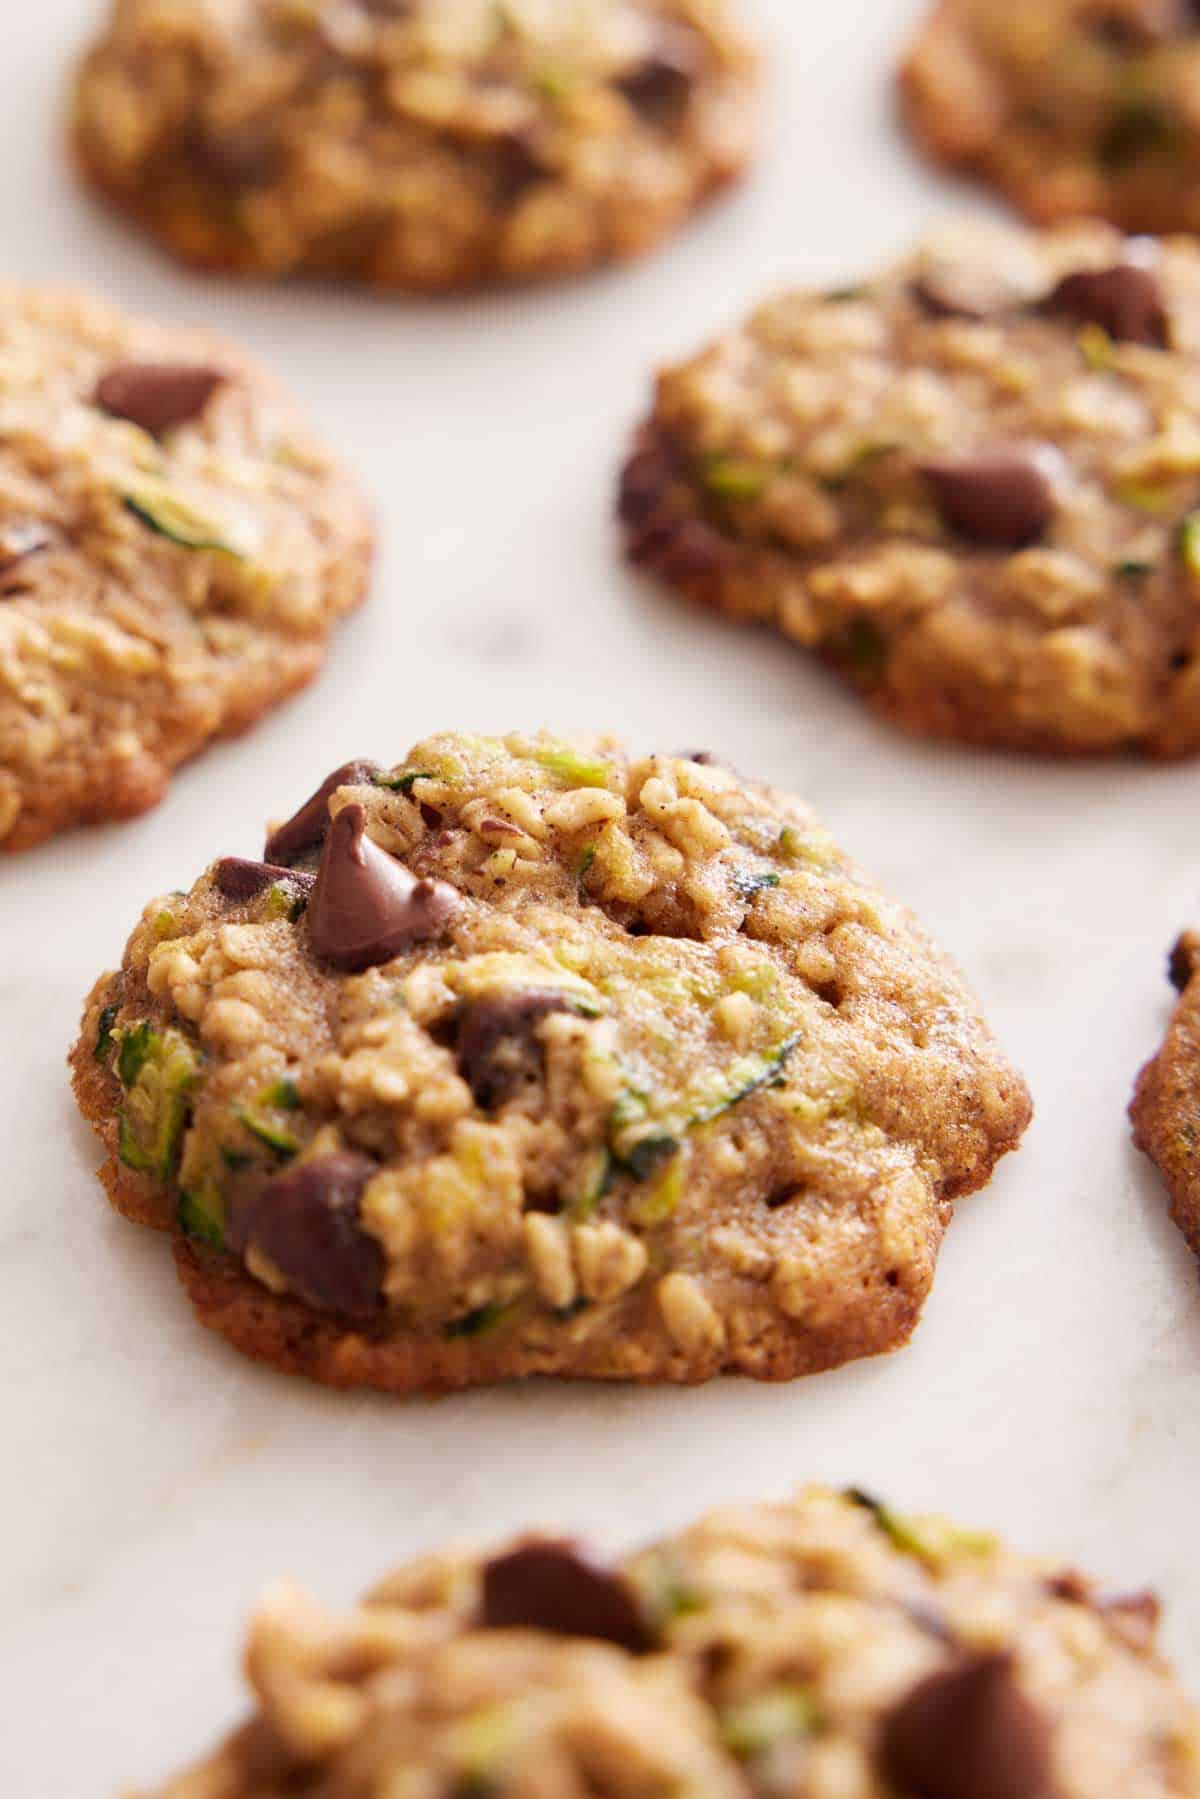 Multiple zucchini cookies on a flat surface with one cookie in focus.